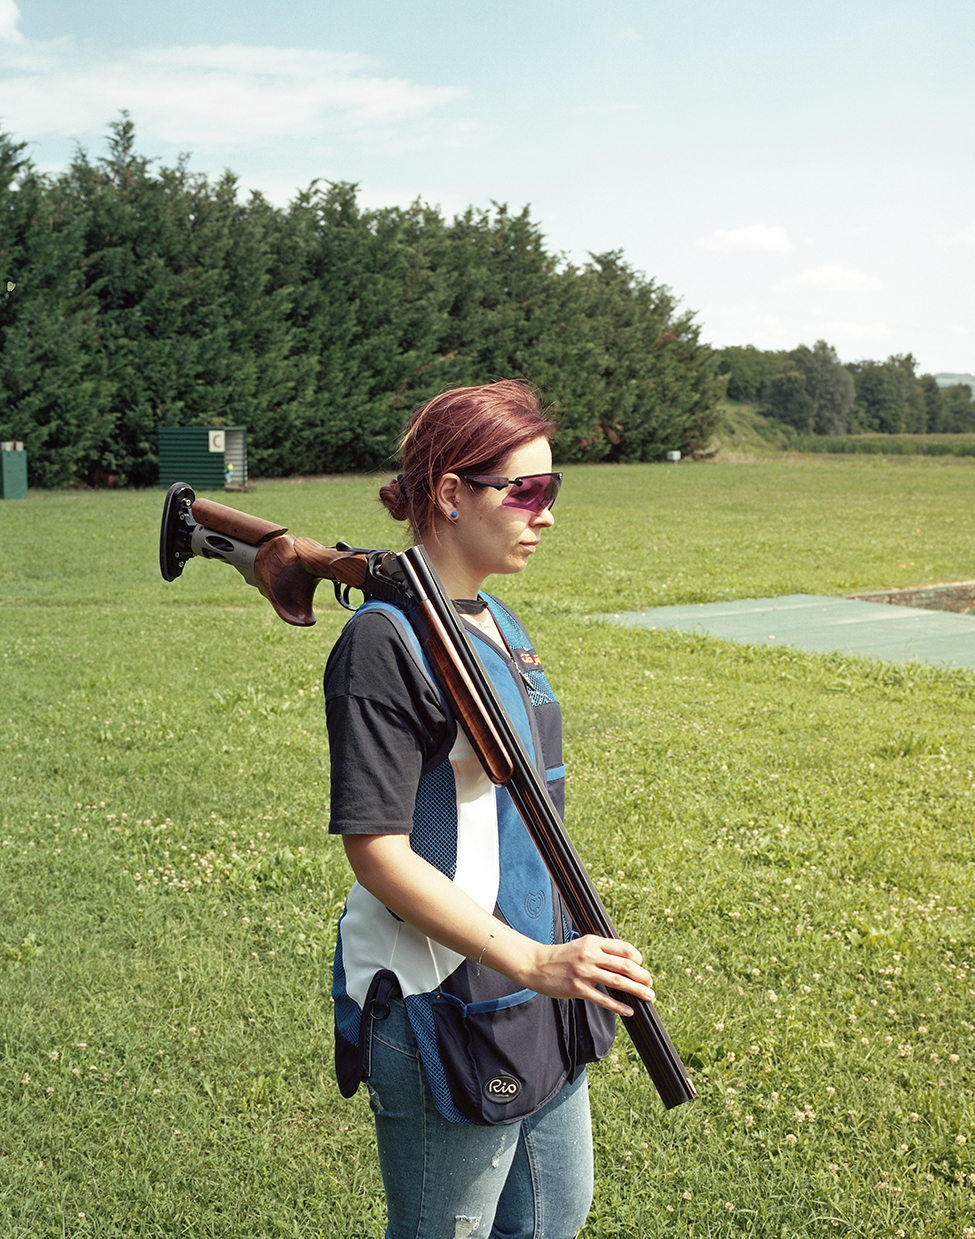  Montebello, Italy, 2018
Laura a young woman from the small town of Montebello at the local shooting range 